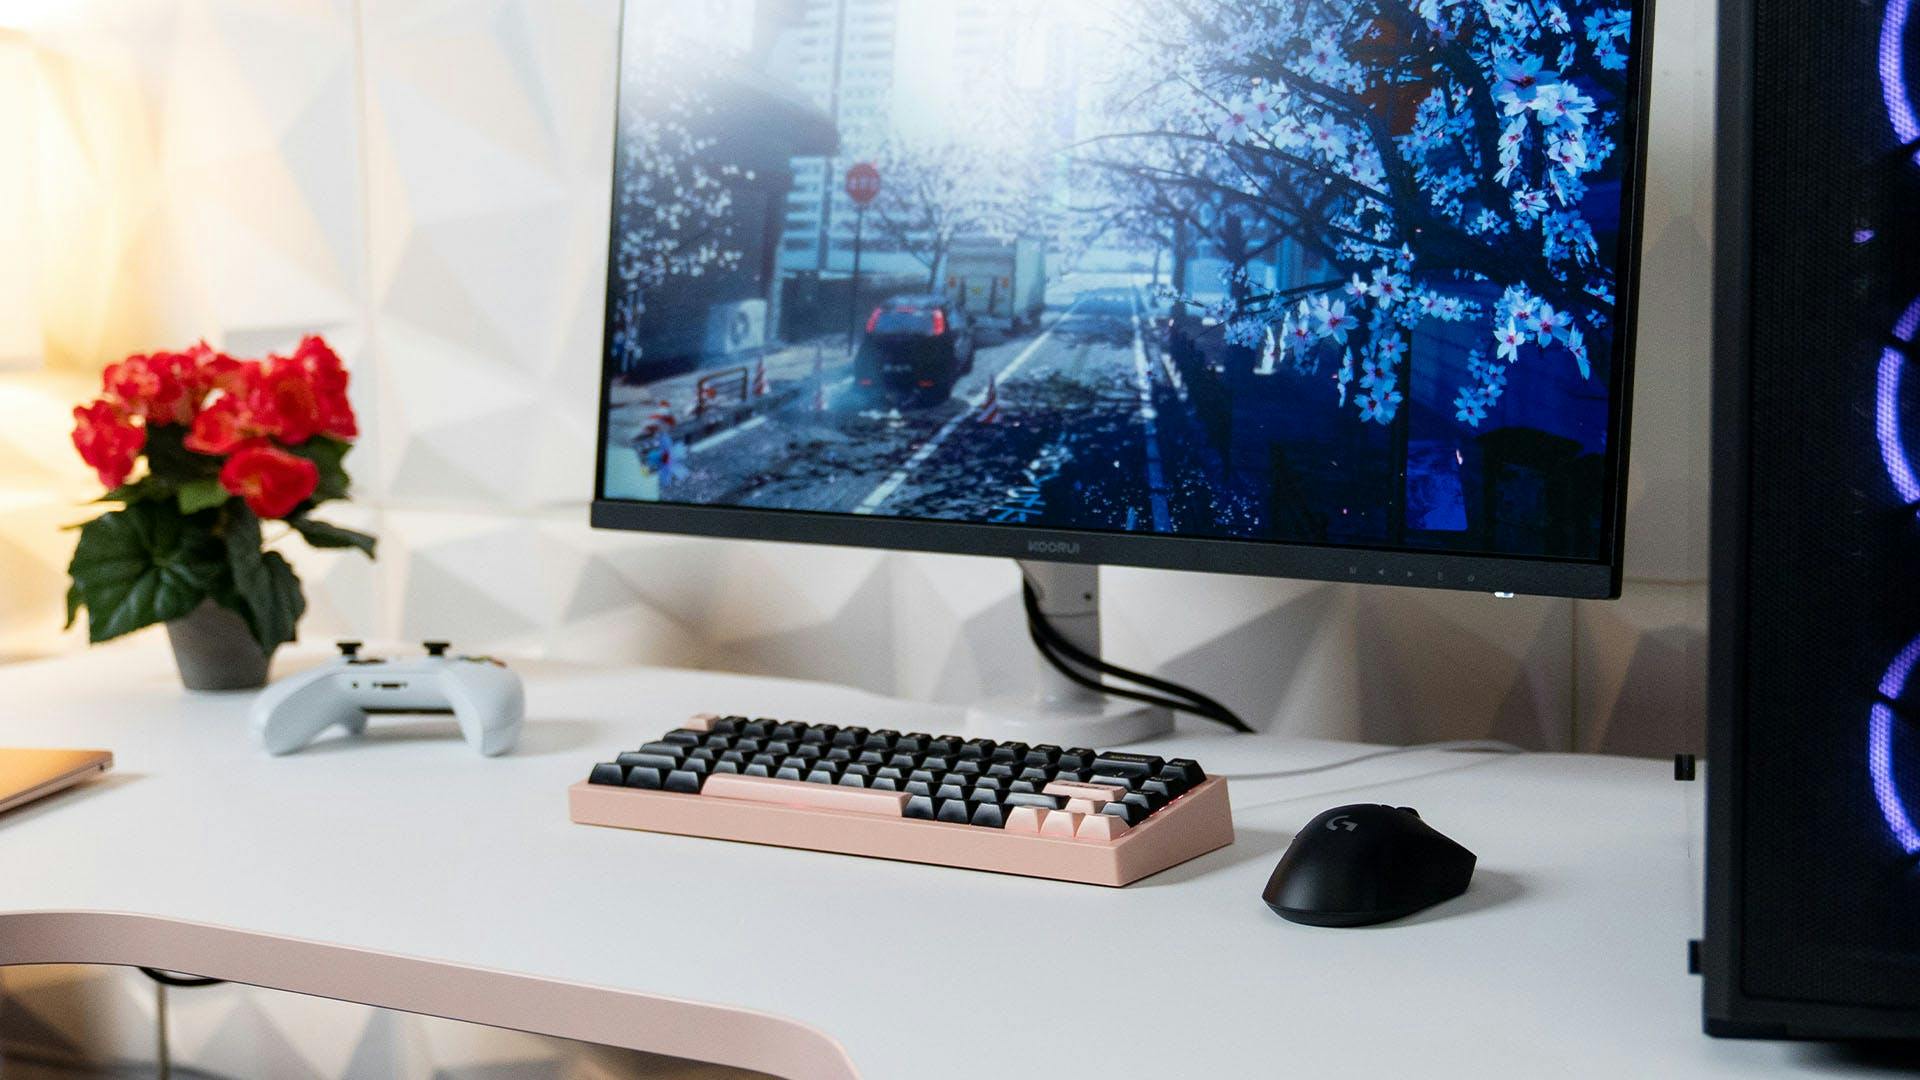 5 Practical Tips on Cable Management for Your PC Setup